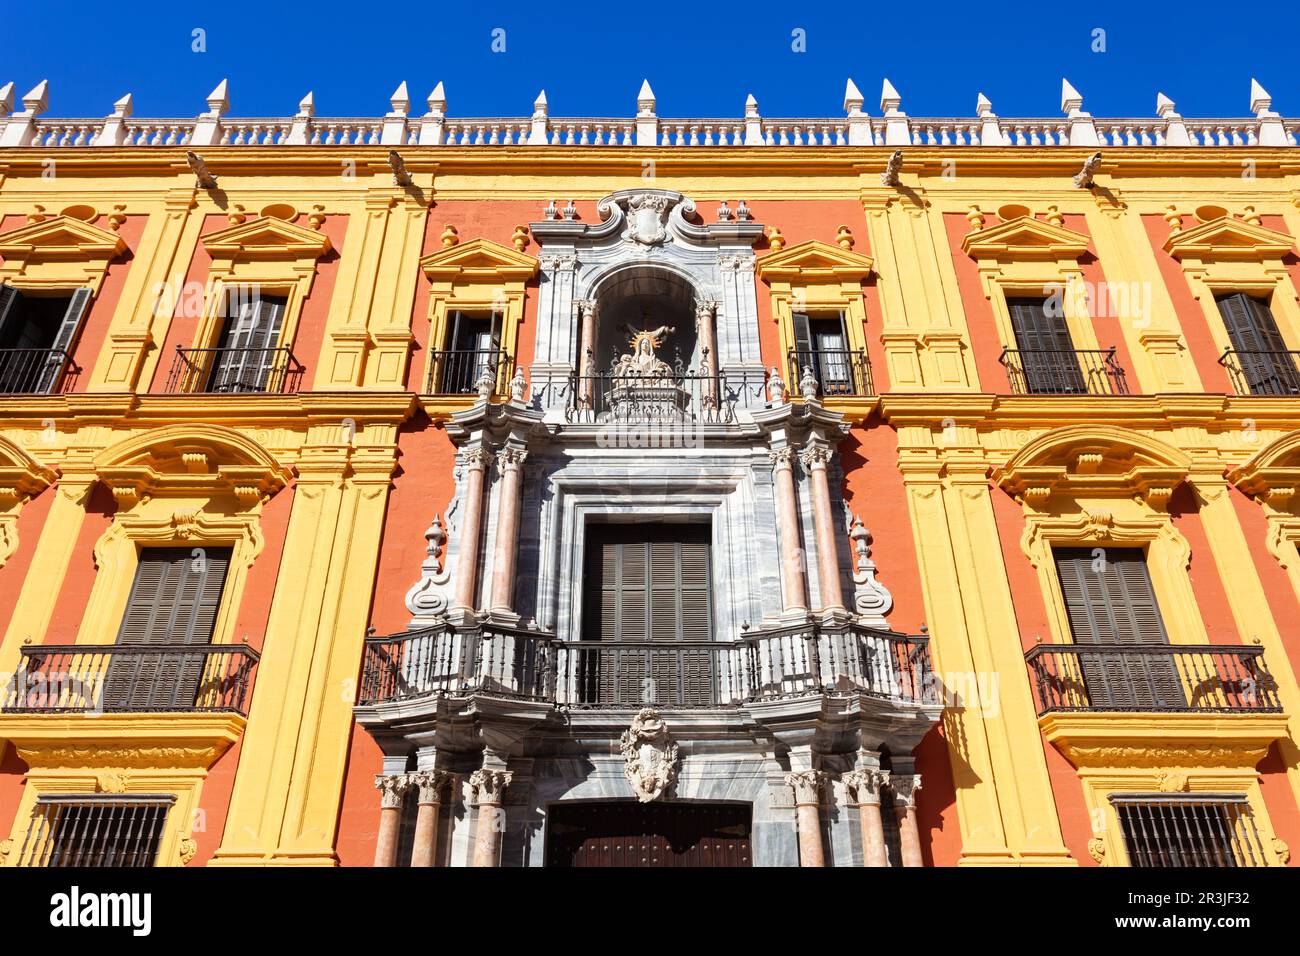 The Episcopal Palace of Malaga is located in the Plaza del Obispo, very close to the Cathedral of Malaga Stock Photo